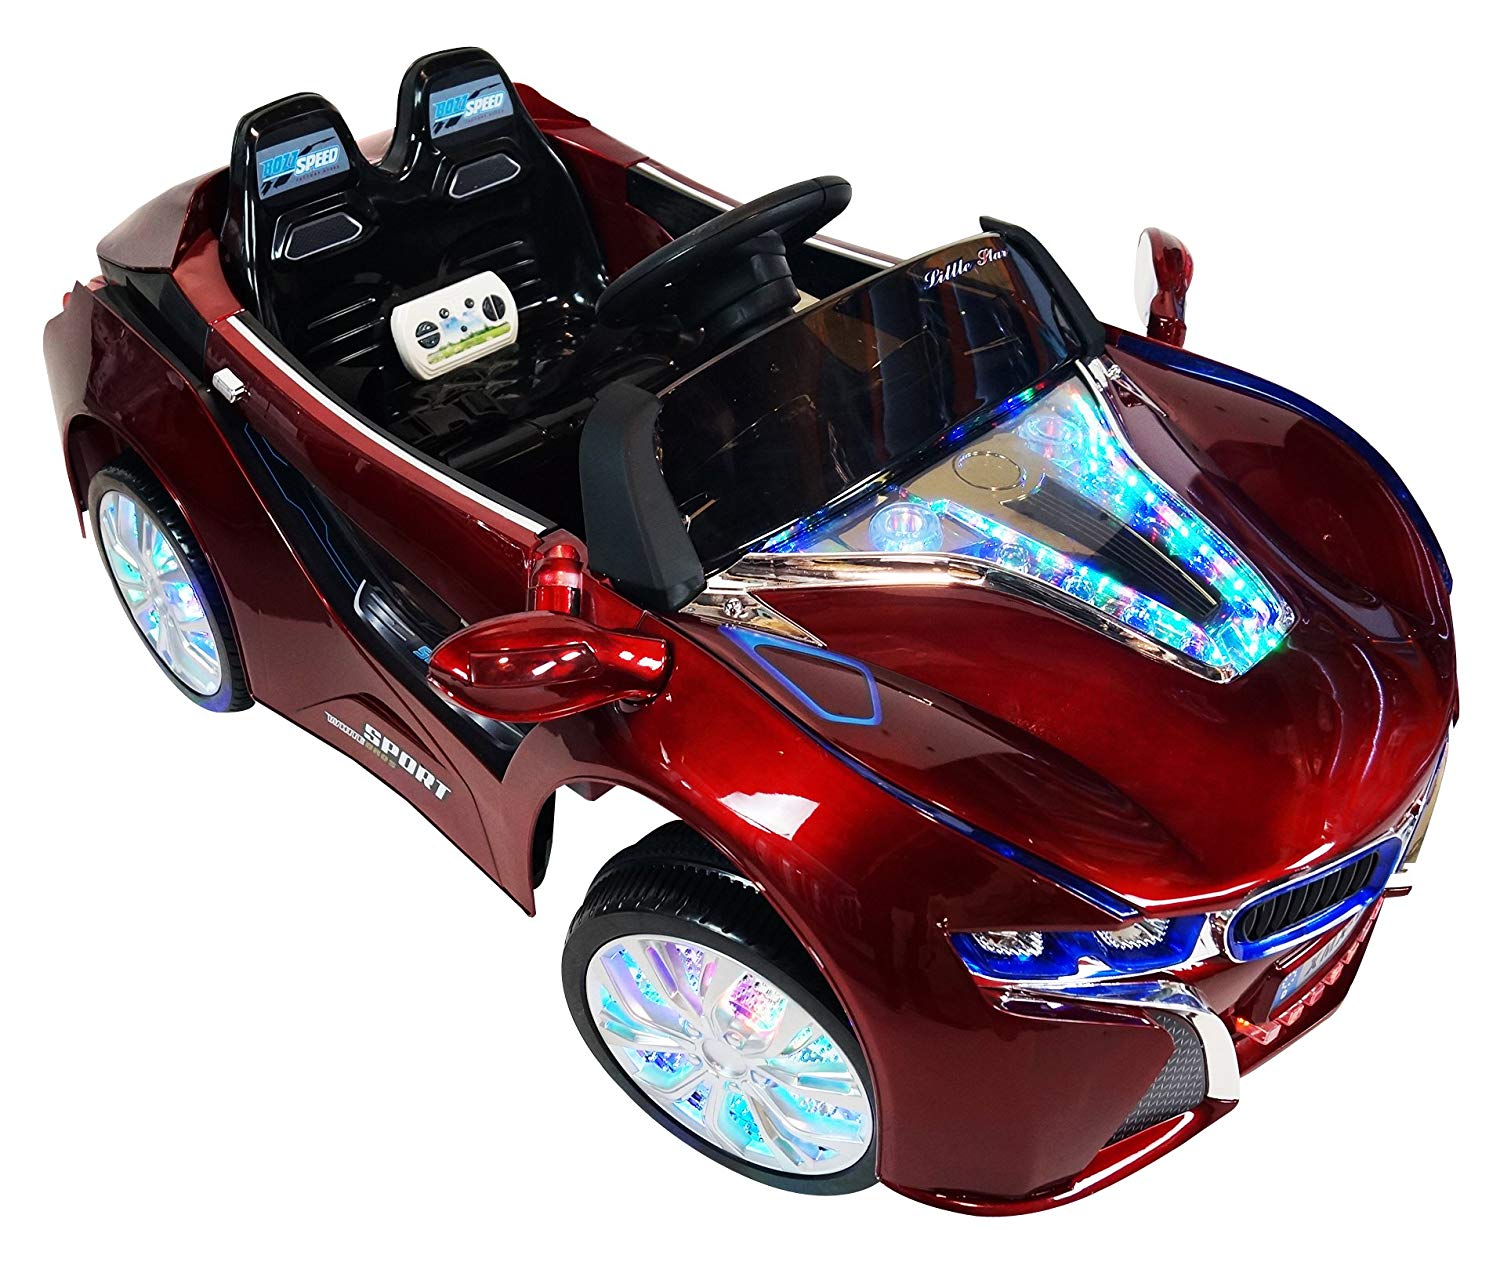 BMW I8 Style Premium Ride On Electric Toy Car for Kids ...